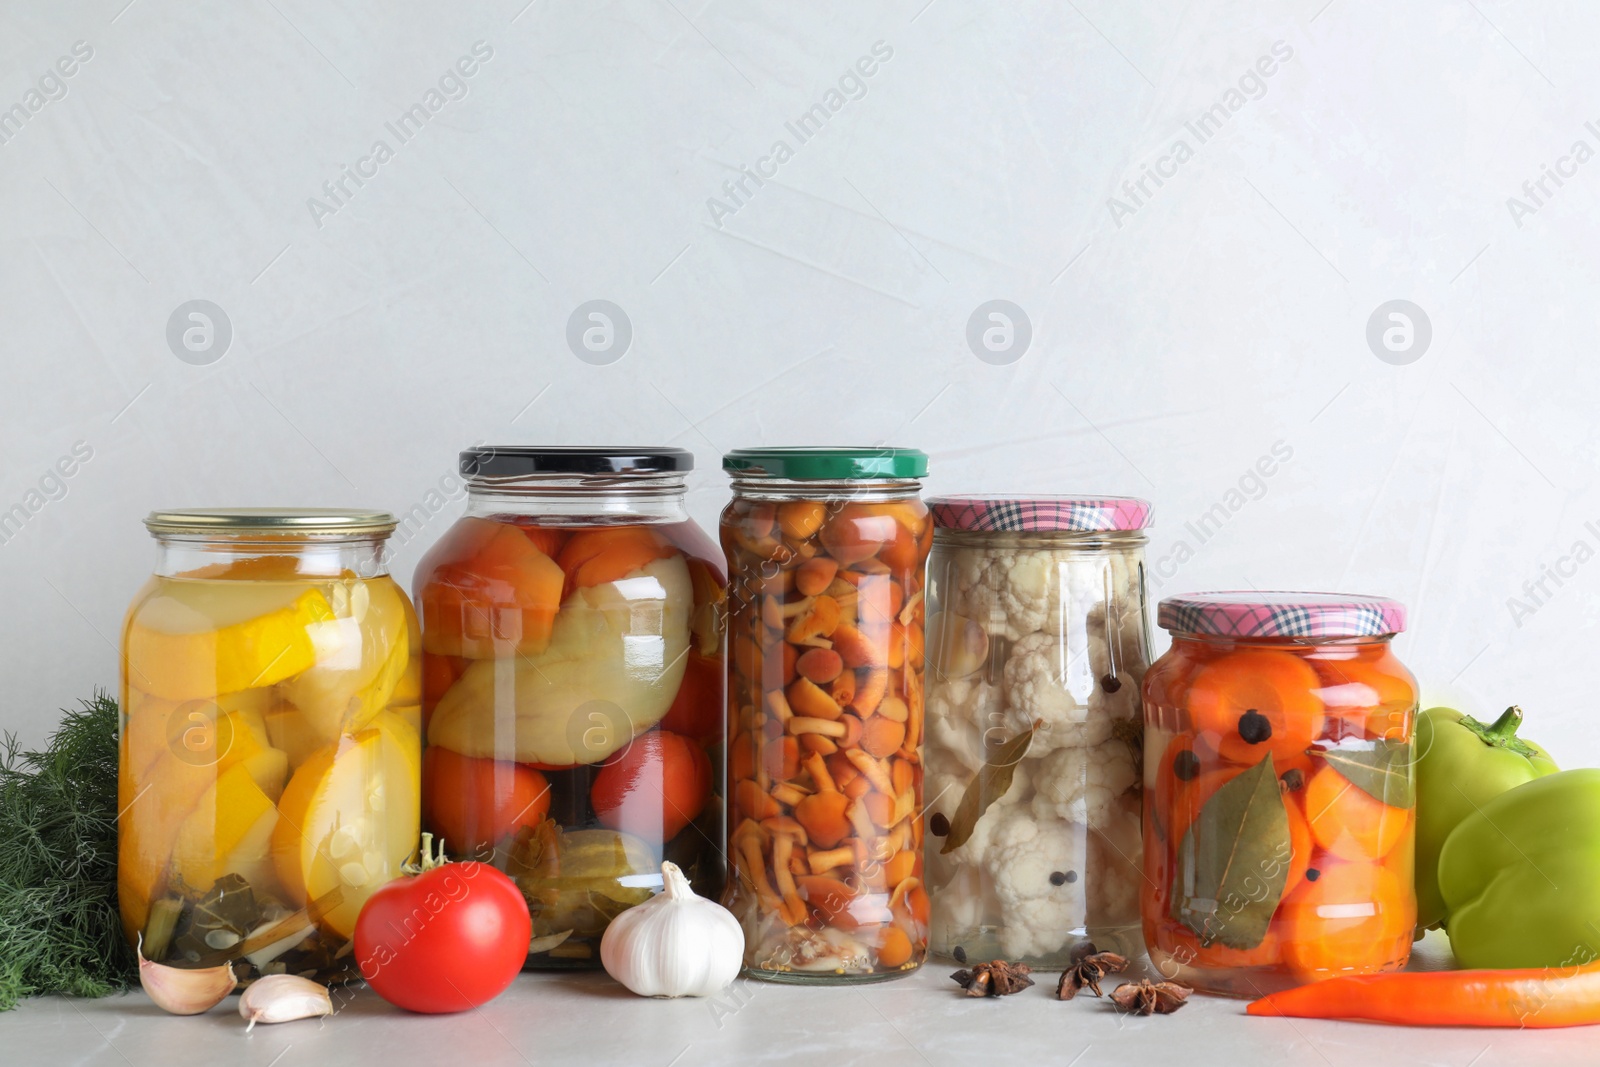 Photo of Fresh vegetables and jars of pickled products on light grey table